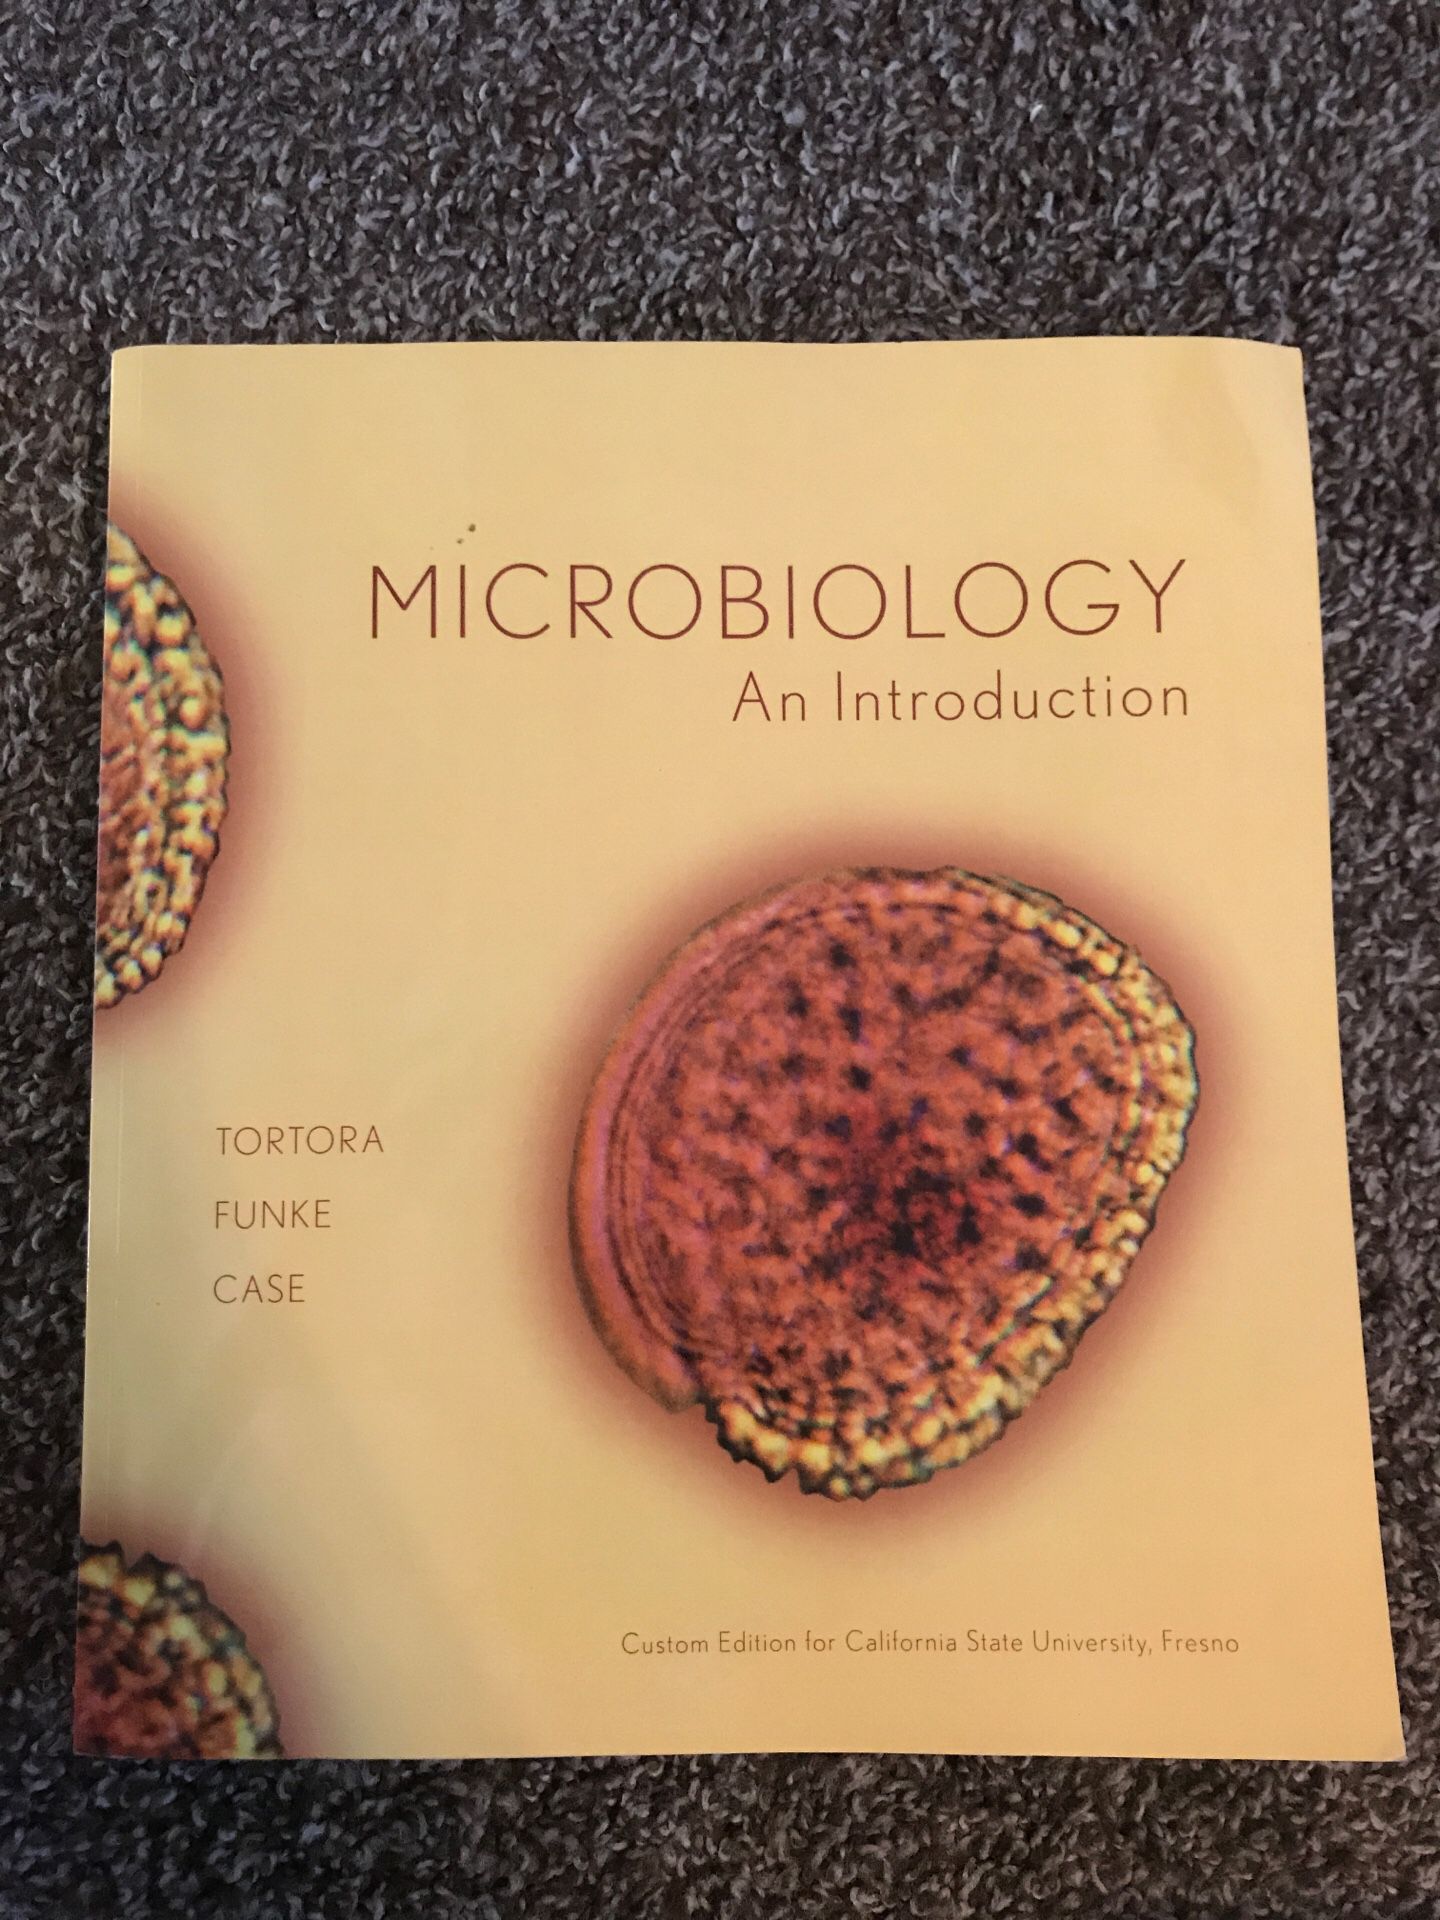 Microbiology introduction